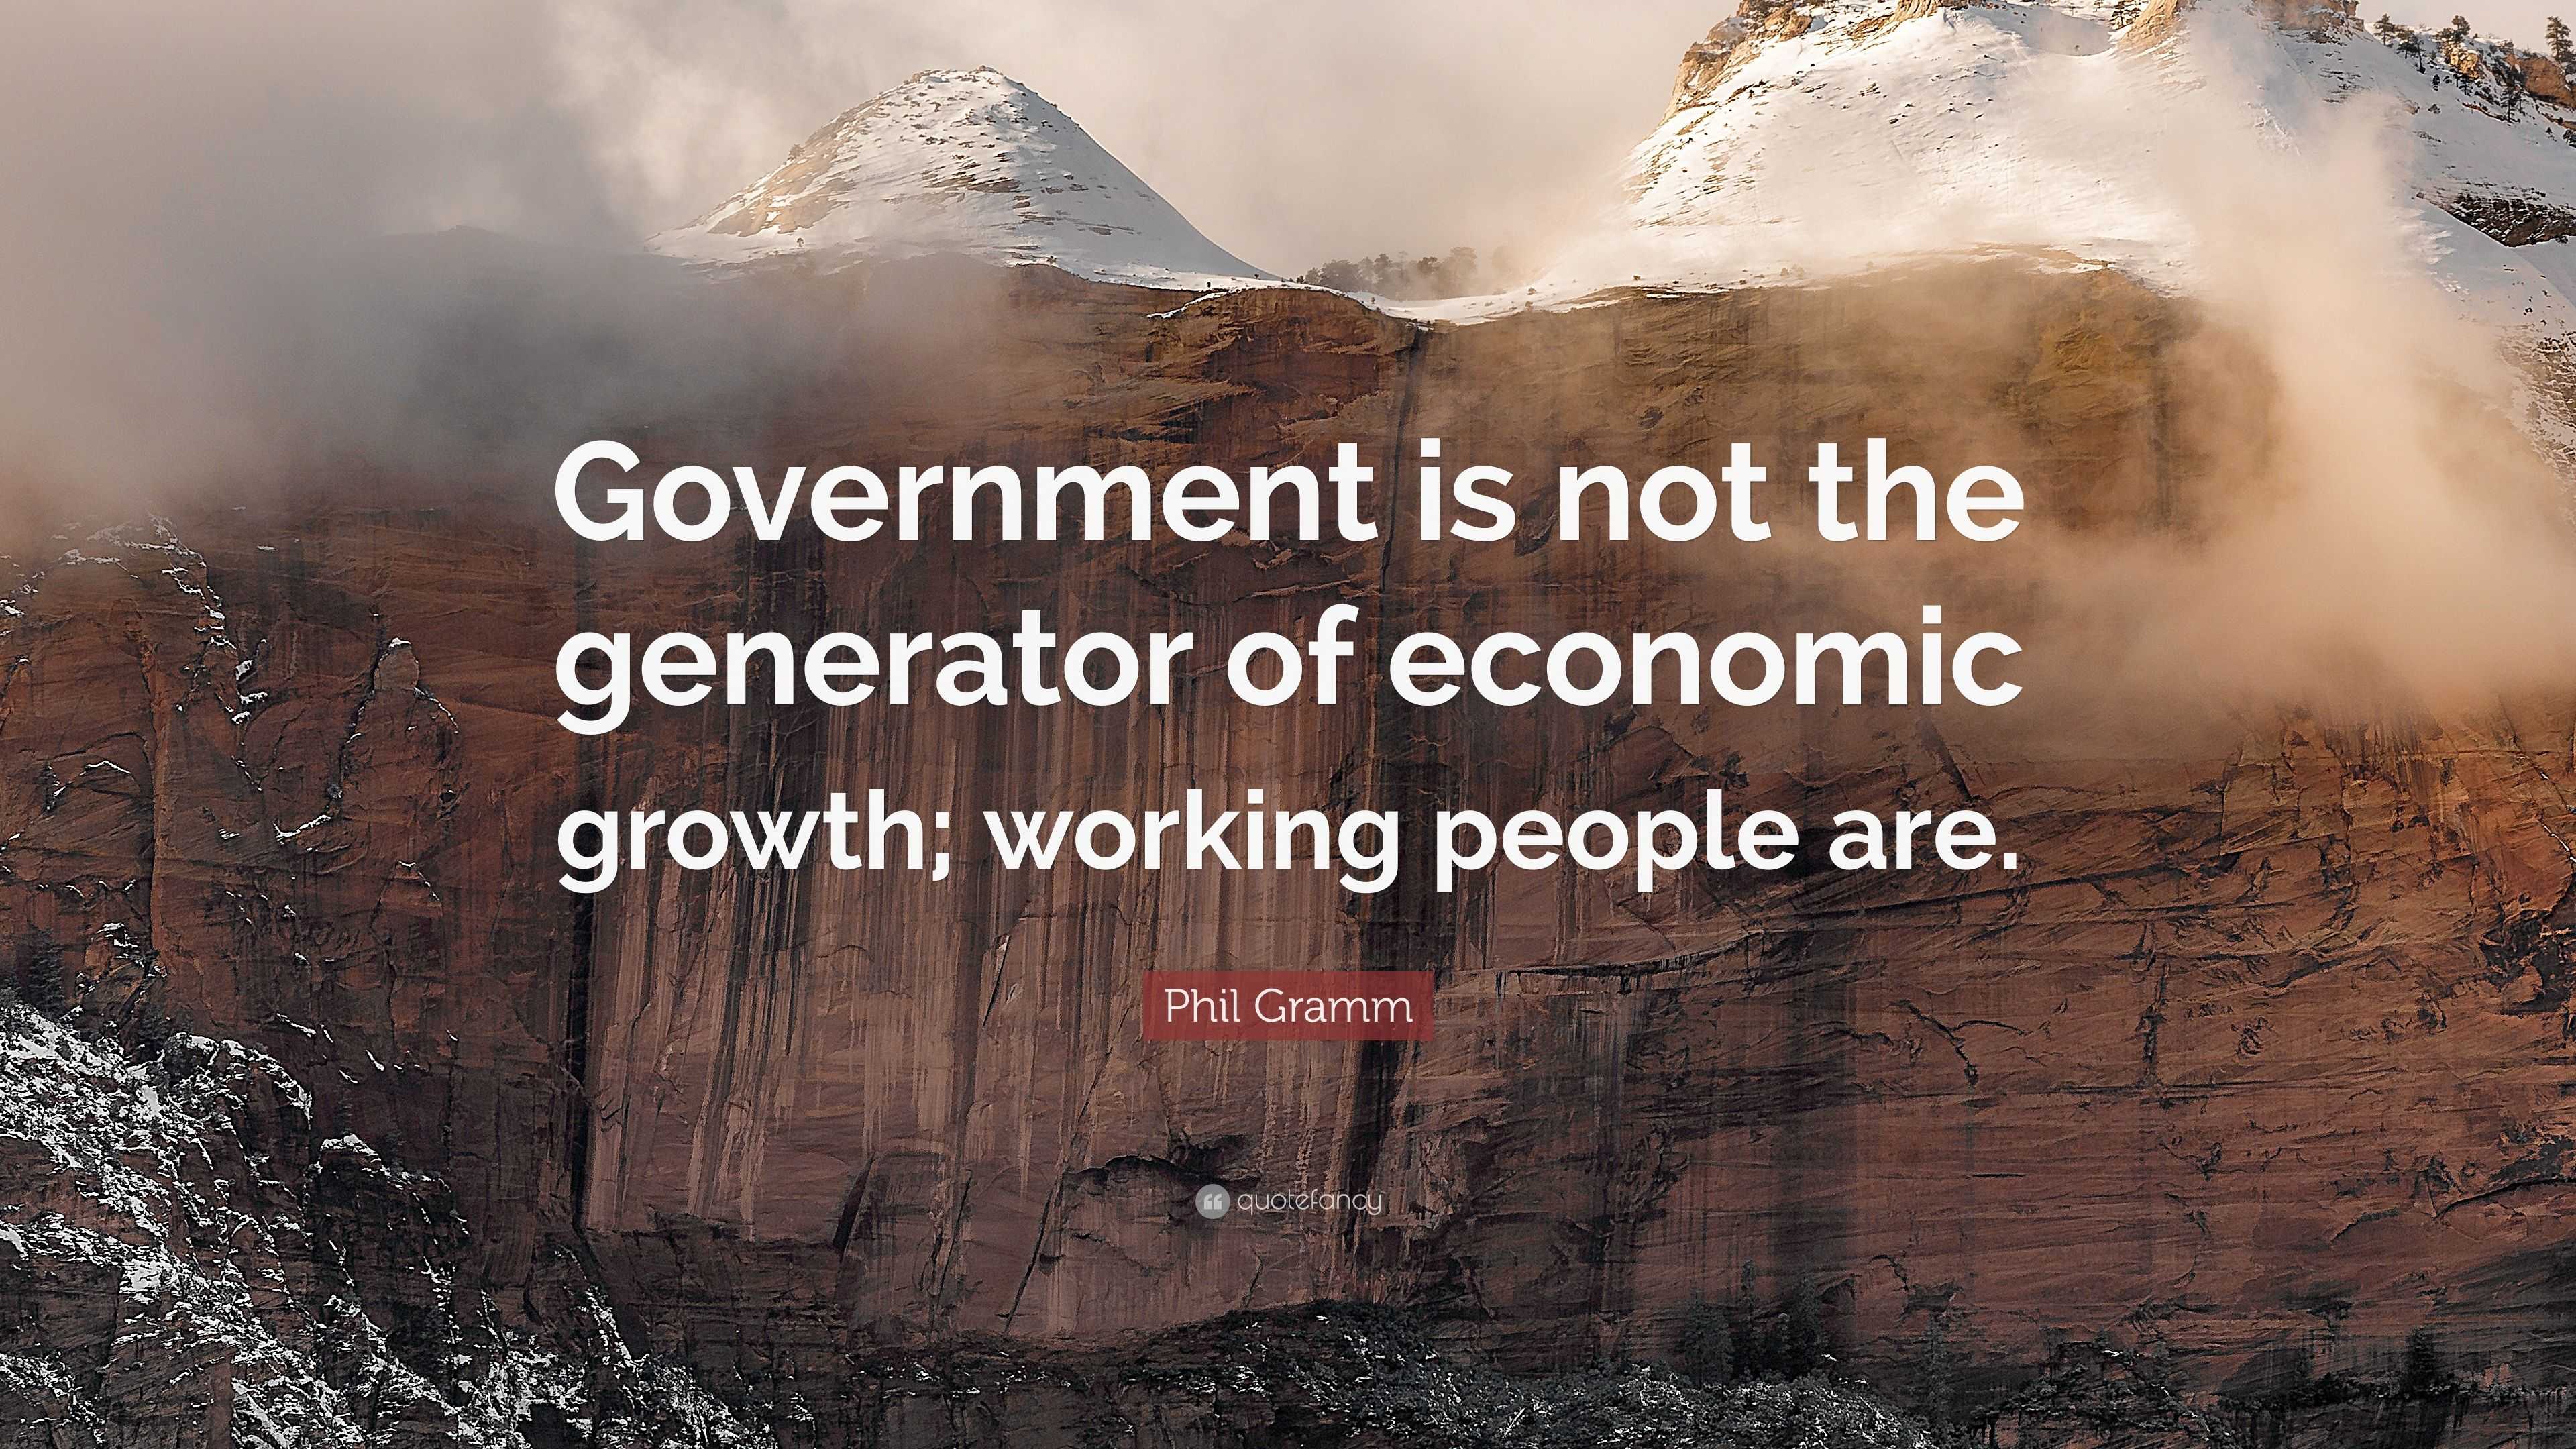 Phil Gramm Quote “Government is not the generator of economic growth